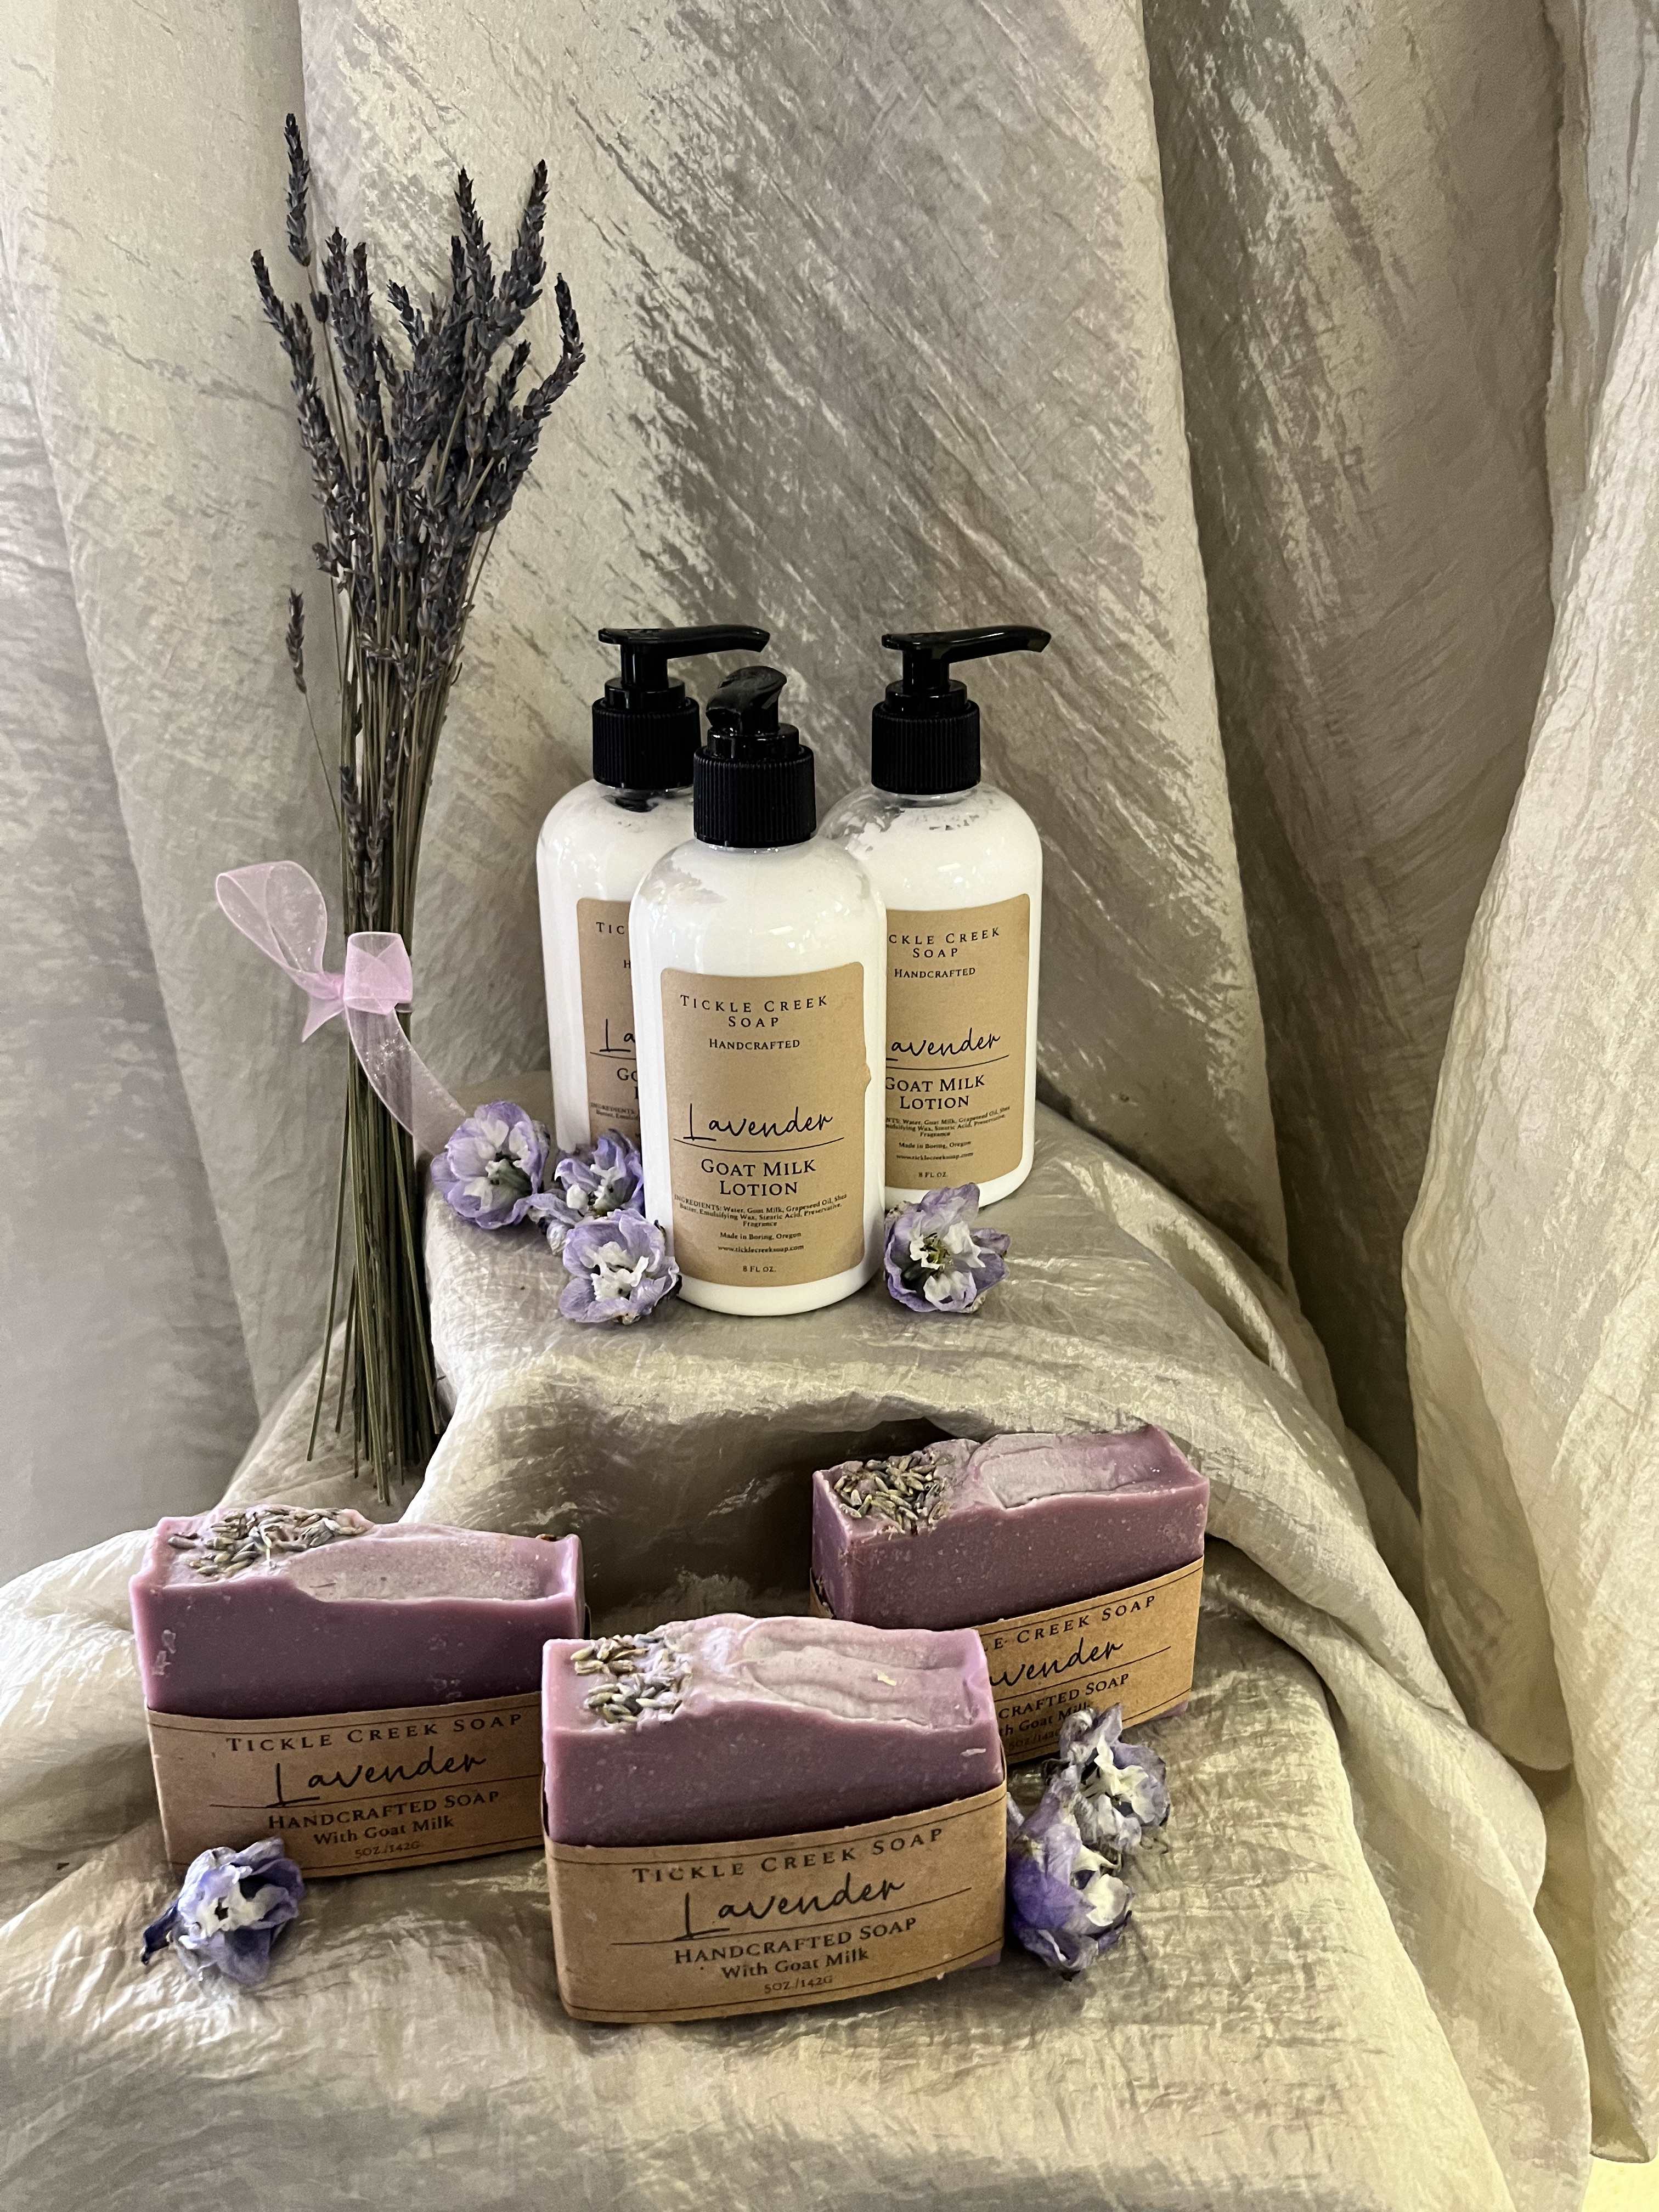 Tickle creek handcrafted lotions and soaps - Goat milk hand crafted  soaps  and lotions in scents of Lavender  and Love  Spell  soap are$9.00 each Lotions are $15.00 each  Gift set $ 25.00 package in clever tent bag  Note florals in picture are not included in  cost - sold seperatly ) All smell heavenly!